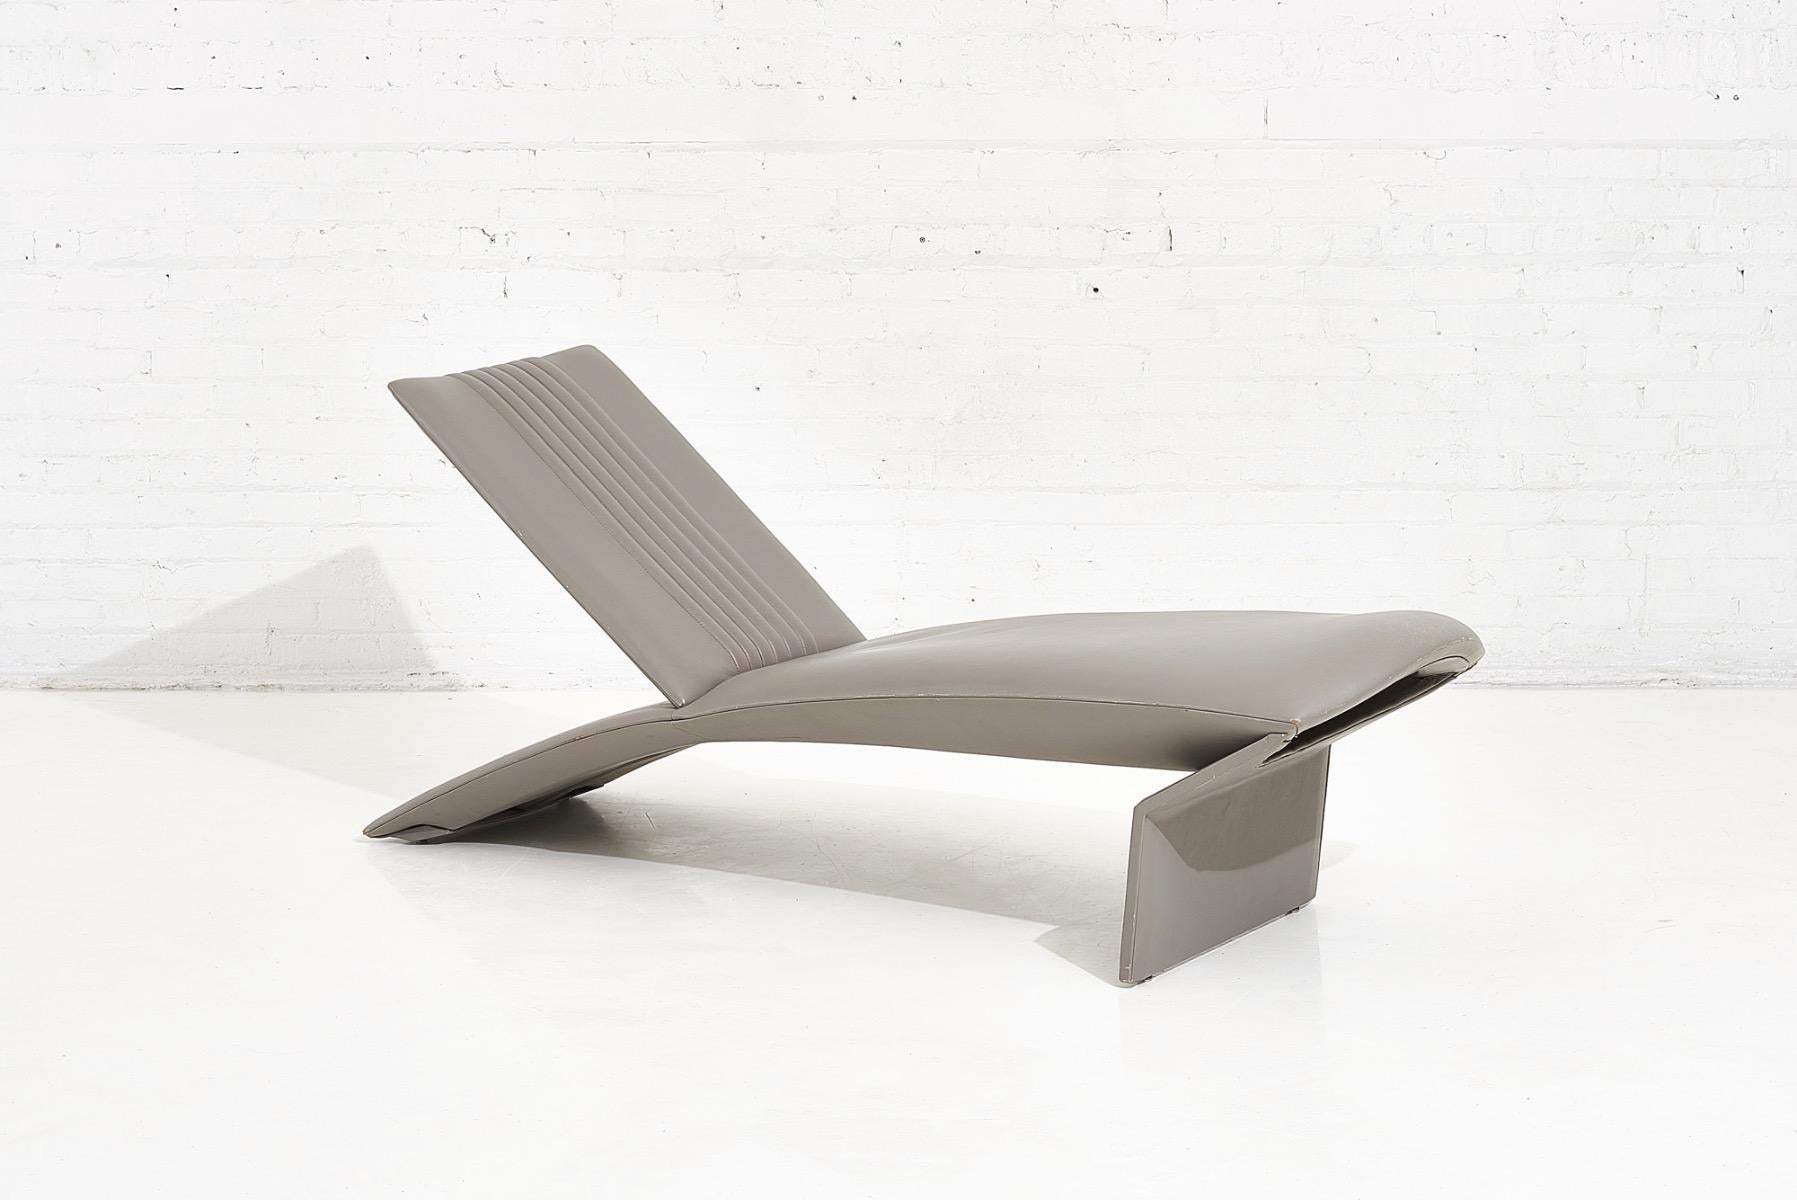 Ke-Zu leather chaise lounge by Dakota Jackson, 1989. A key figure of the Art Furniture Movement, Dakota was known for his avant-garde works involving moving parts or hidden compartments. At the foot of this chaise you will find a hidden compartment